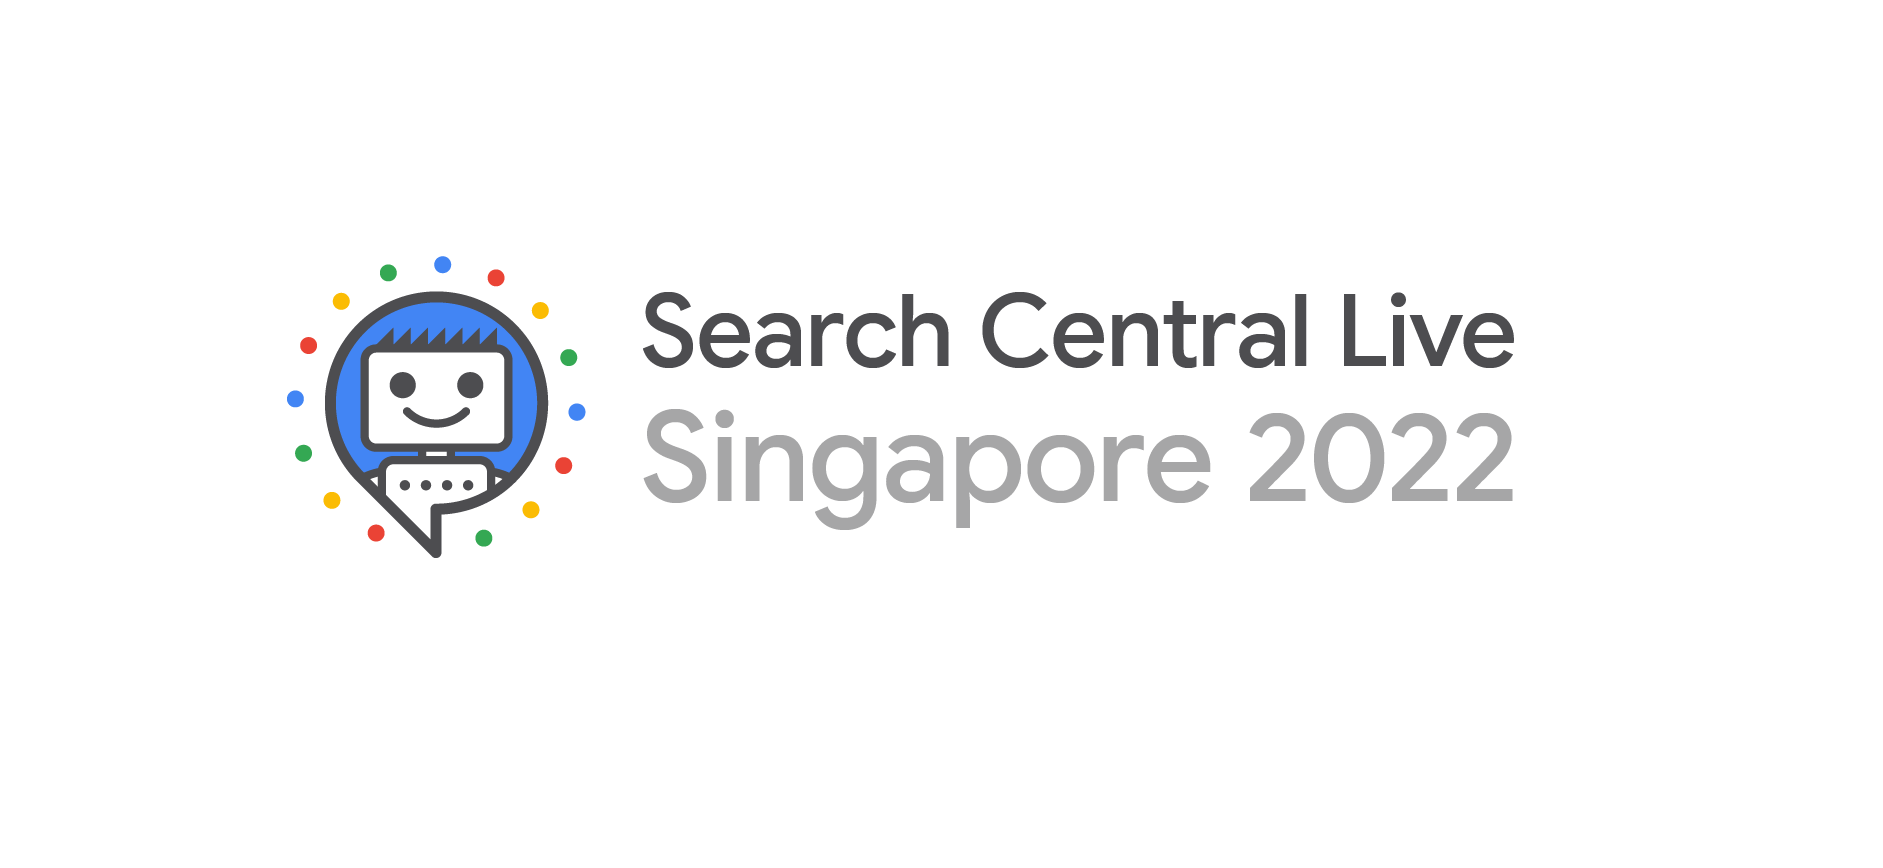 Back in business: Search Central Live events  |  Google Search Central Blog  |  Google Developers